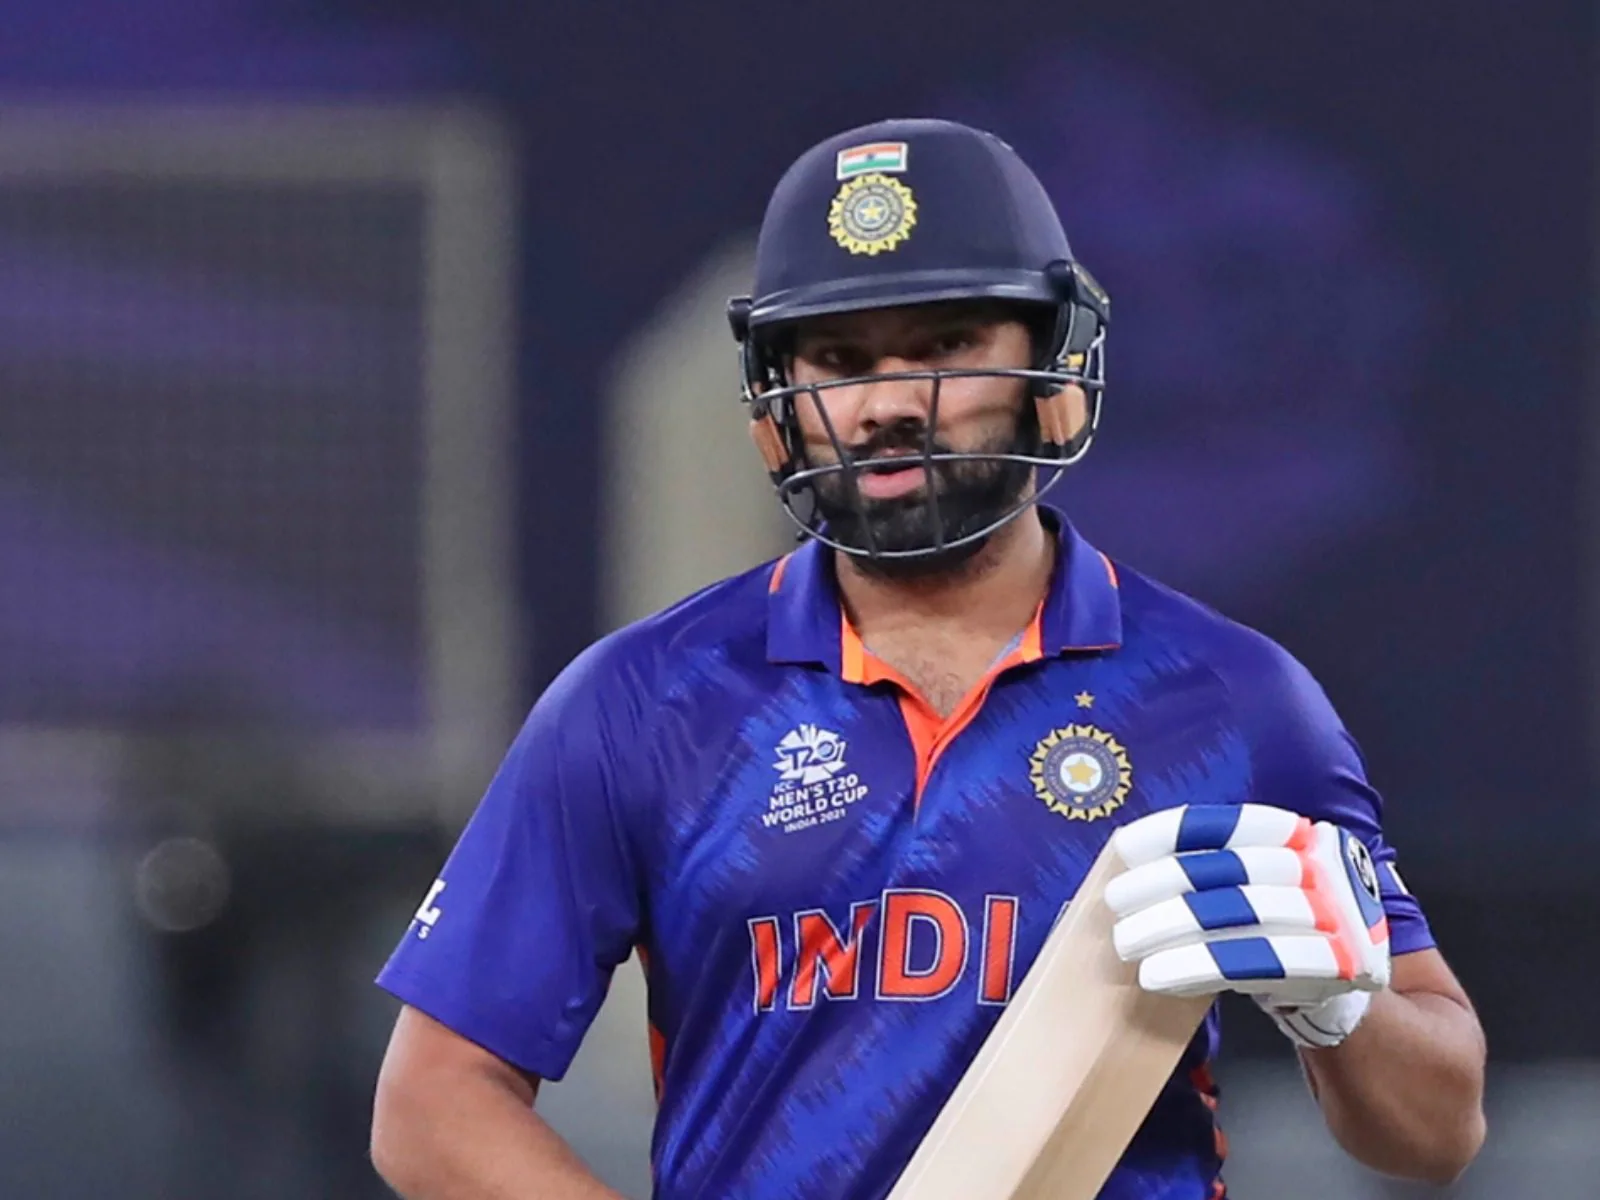 Rohit Sharma now has the second most sixes in international cricket